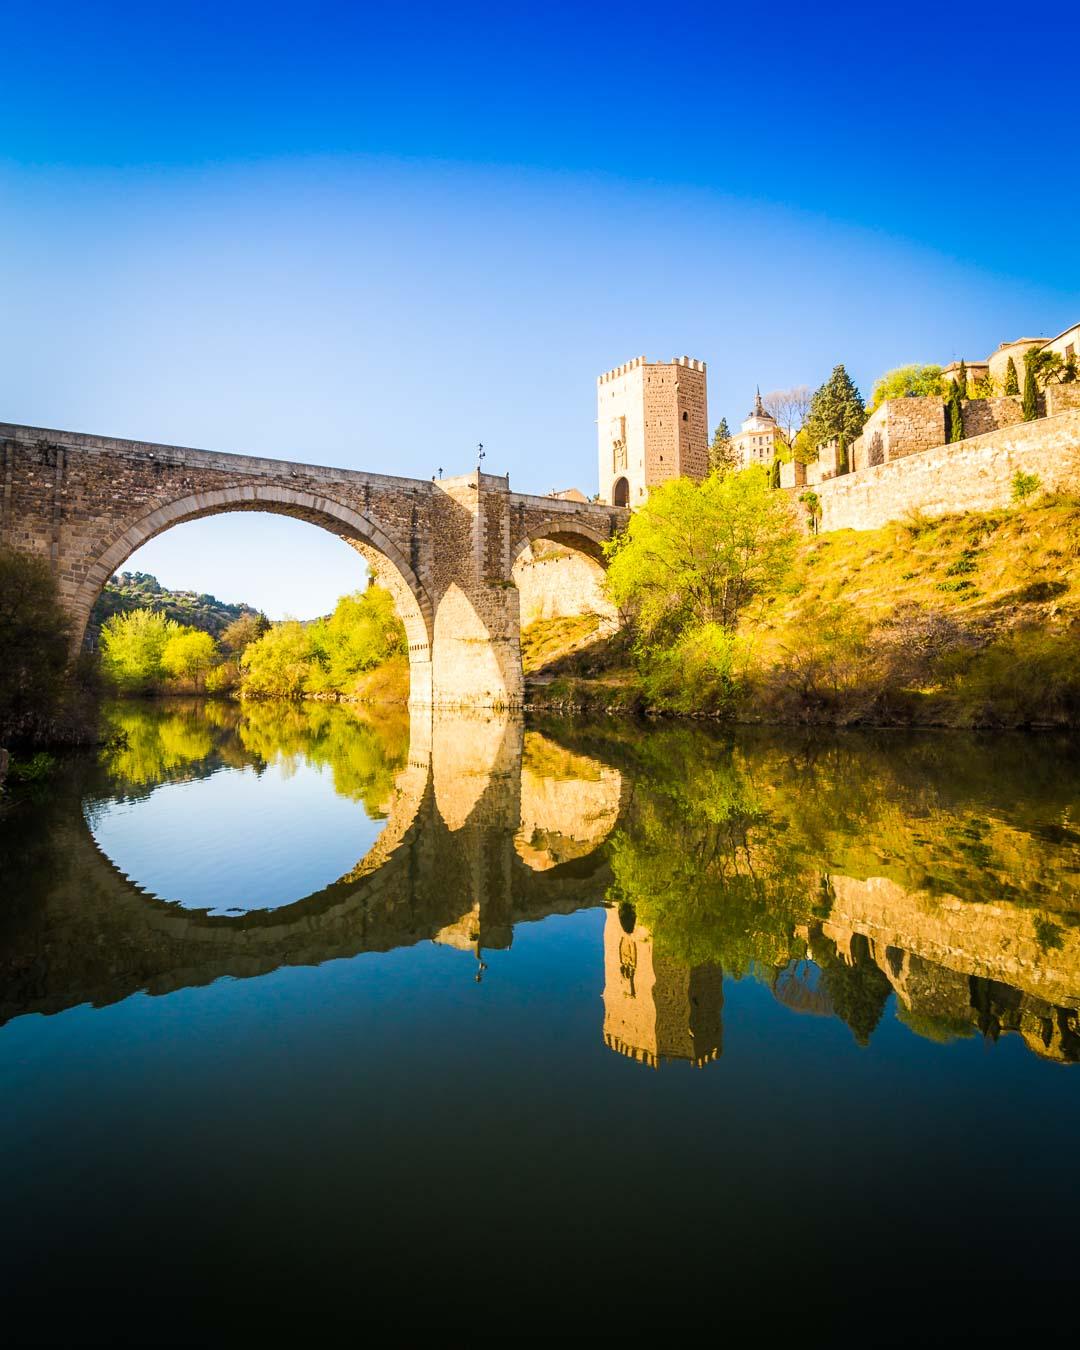 seeing the puente de alcantara reflecting in the tagus river, one of the top things to do in toledo spain